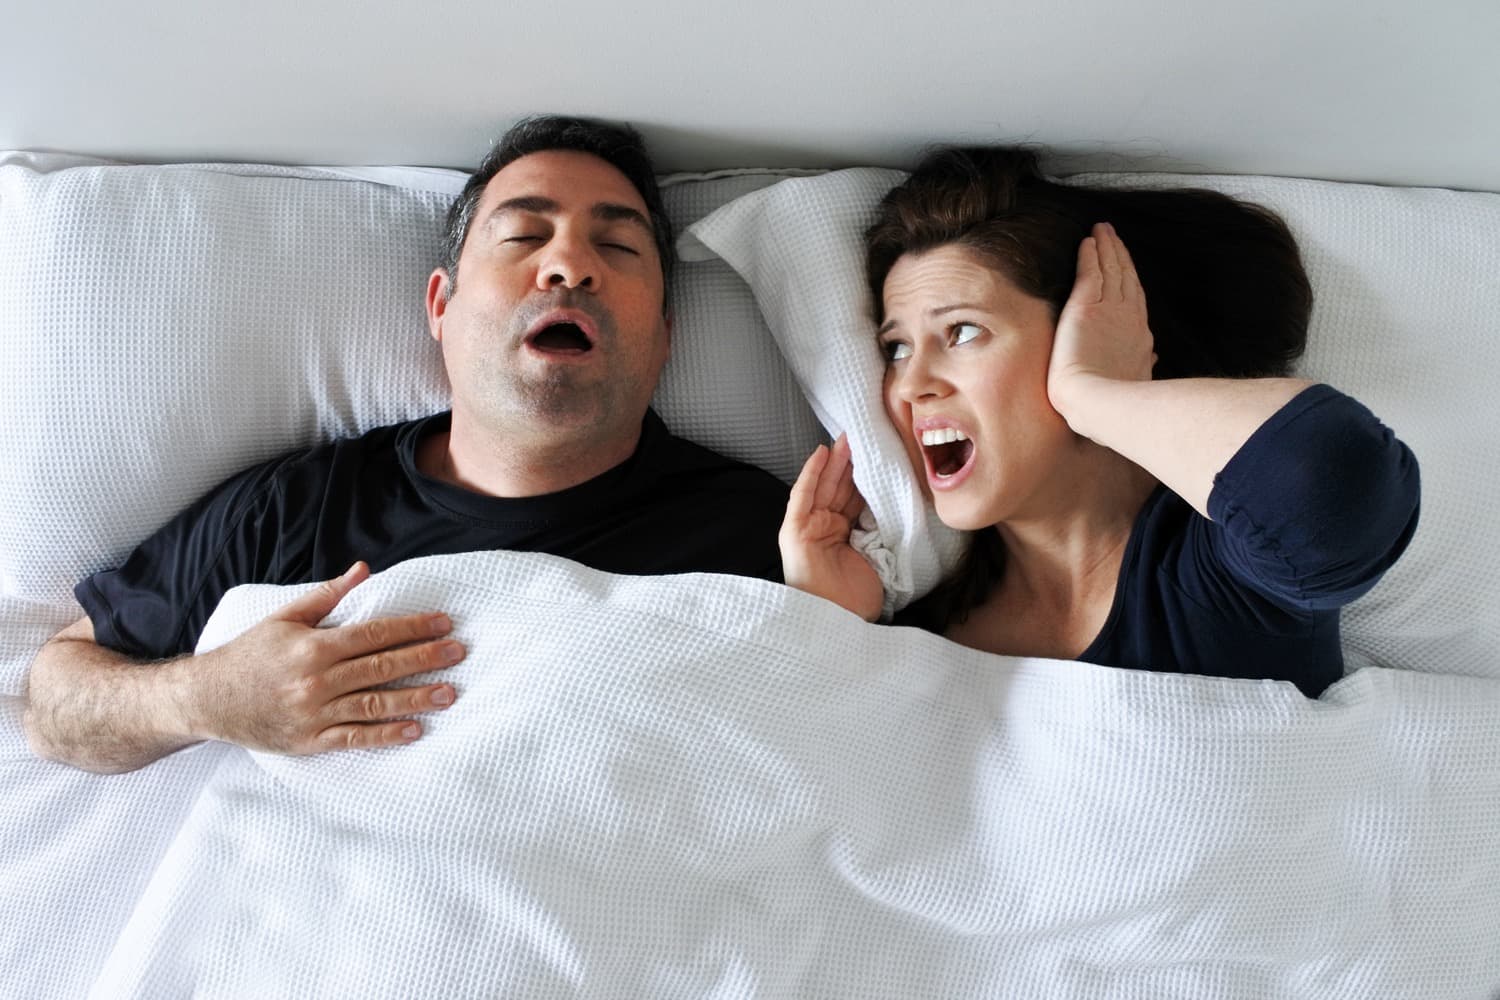 Women in bed with partner covering her ears with a look of frustration over partner snoring loudly. Snoring from sleep apnea, losing sleep, pediatric sleep apnea, myofunctional therapy and frenectomy